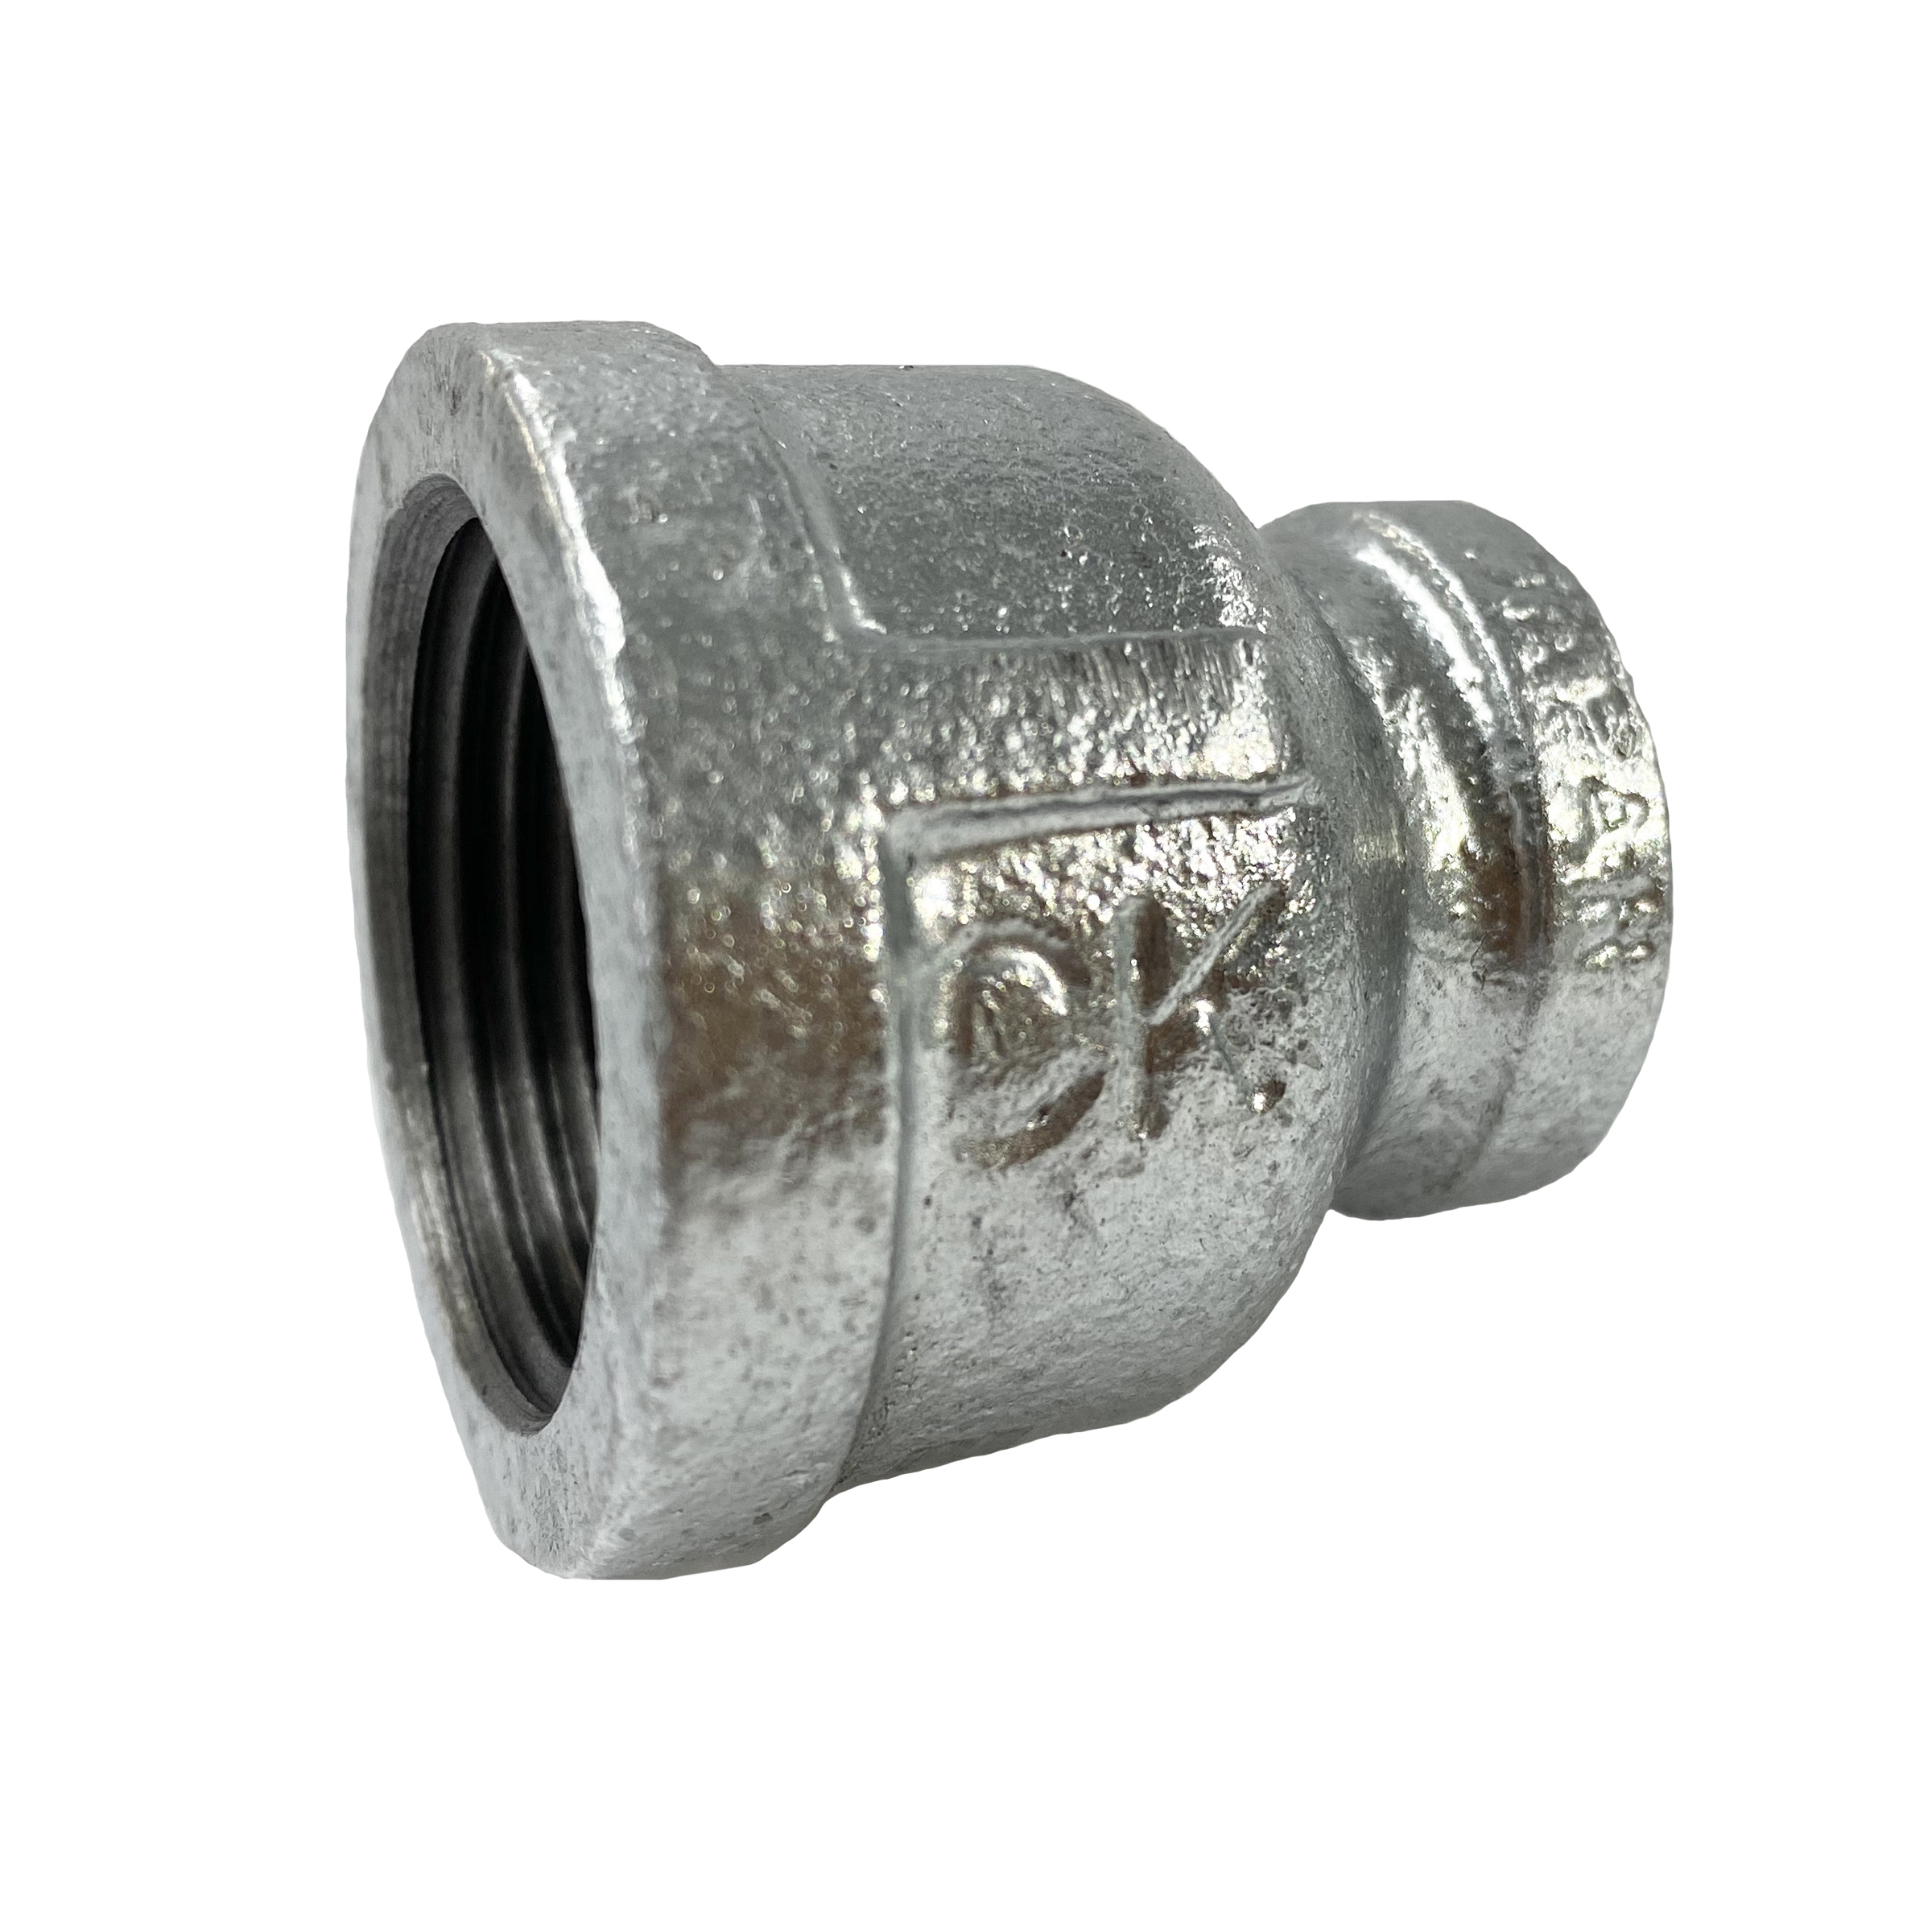 CK Fittings - Screw-in Type Malleable Cast Iron Pipe Fitting - Socket with Different Diameters with Band BRS-50X40-W